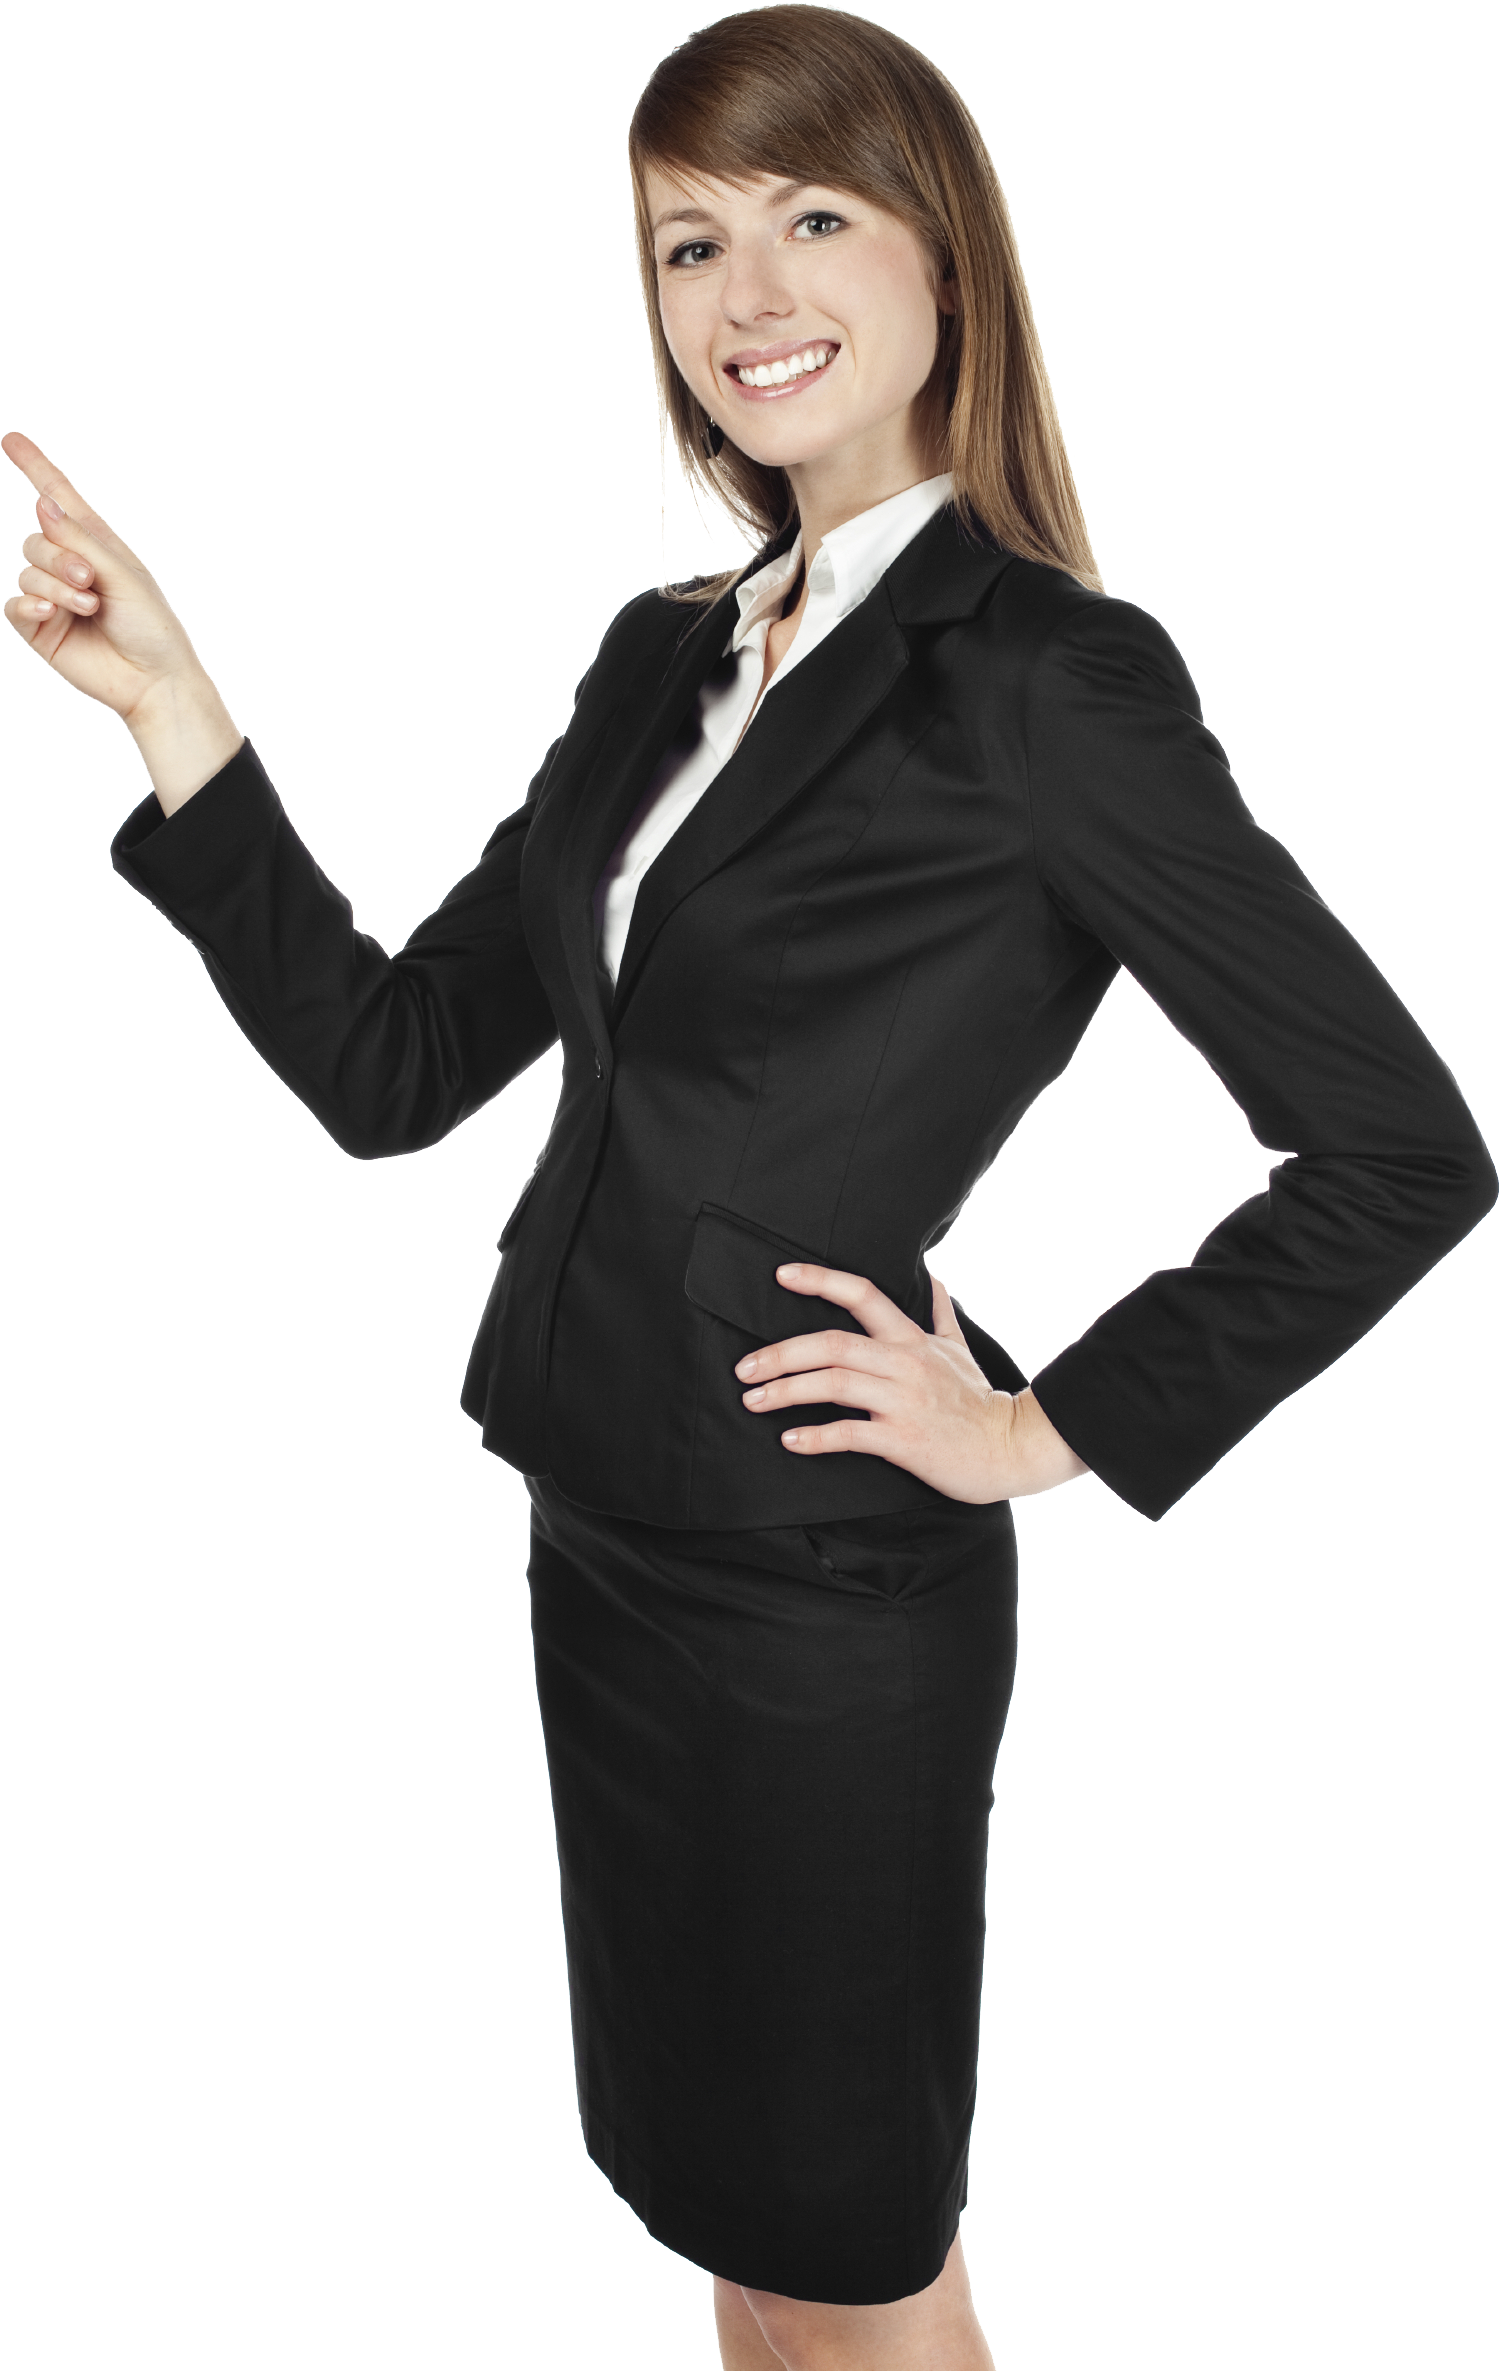 Professional Woman Business HQ Image Free PNG Image